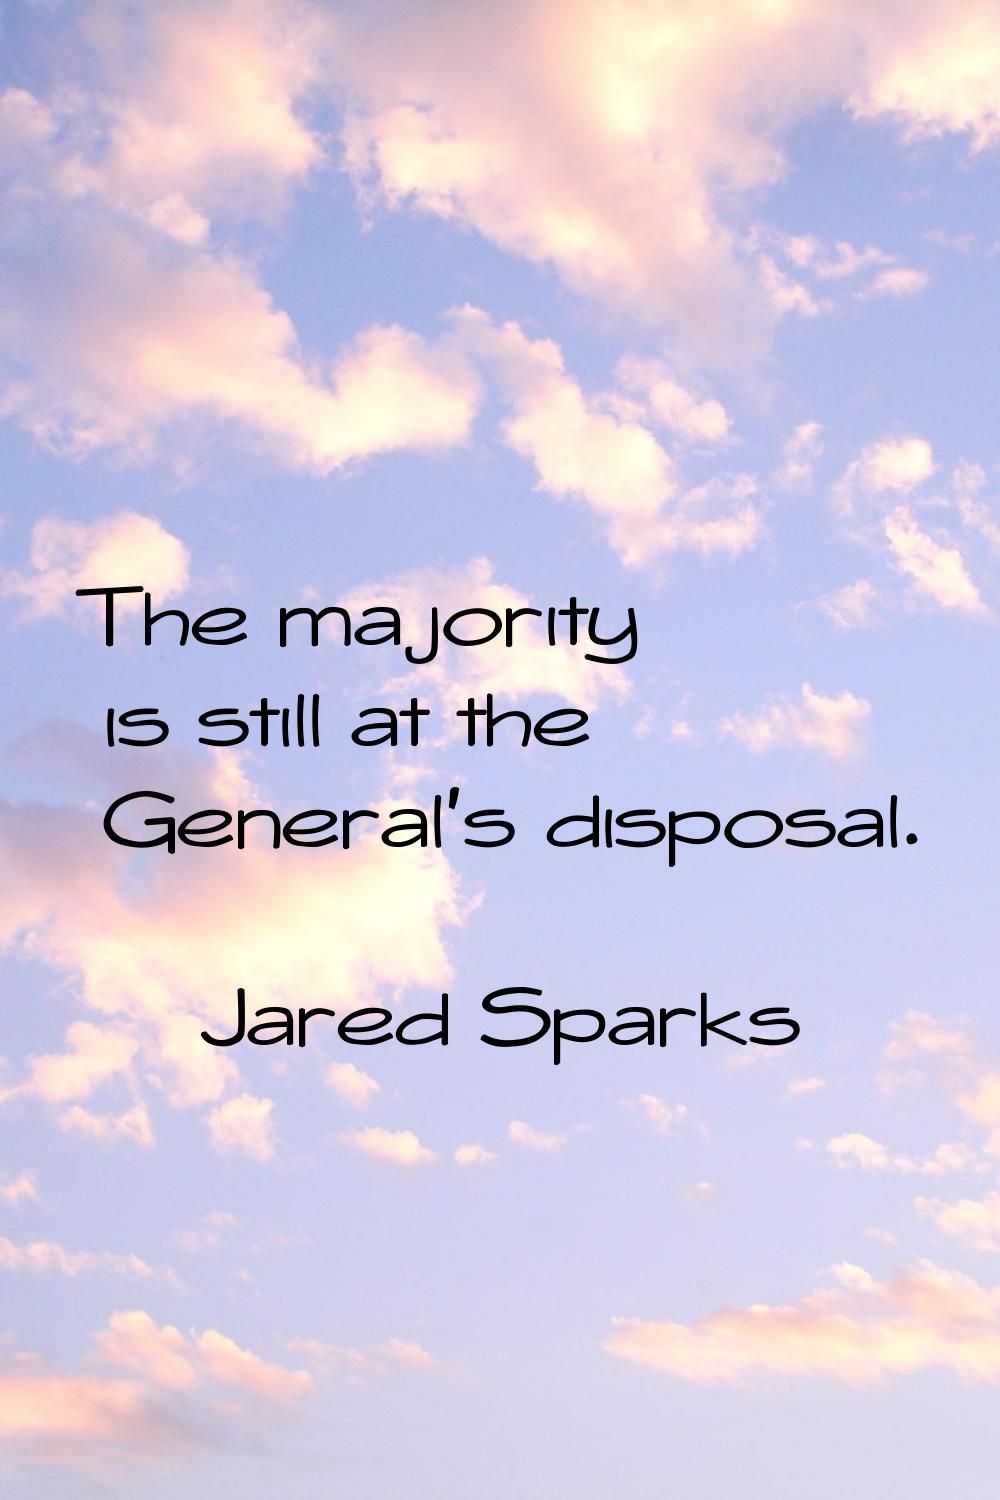 The majority is still at the General's disposal.